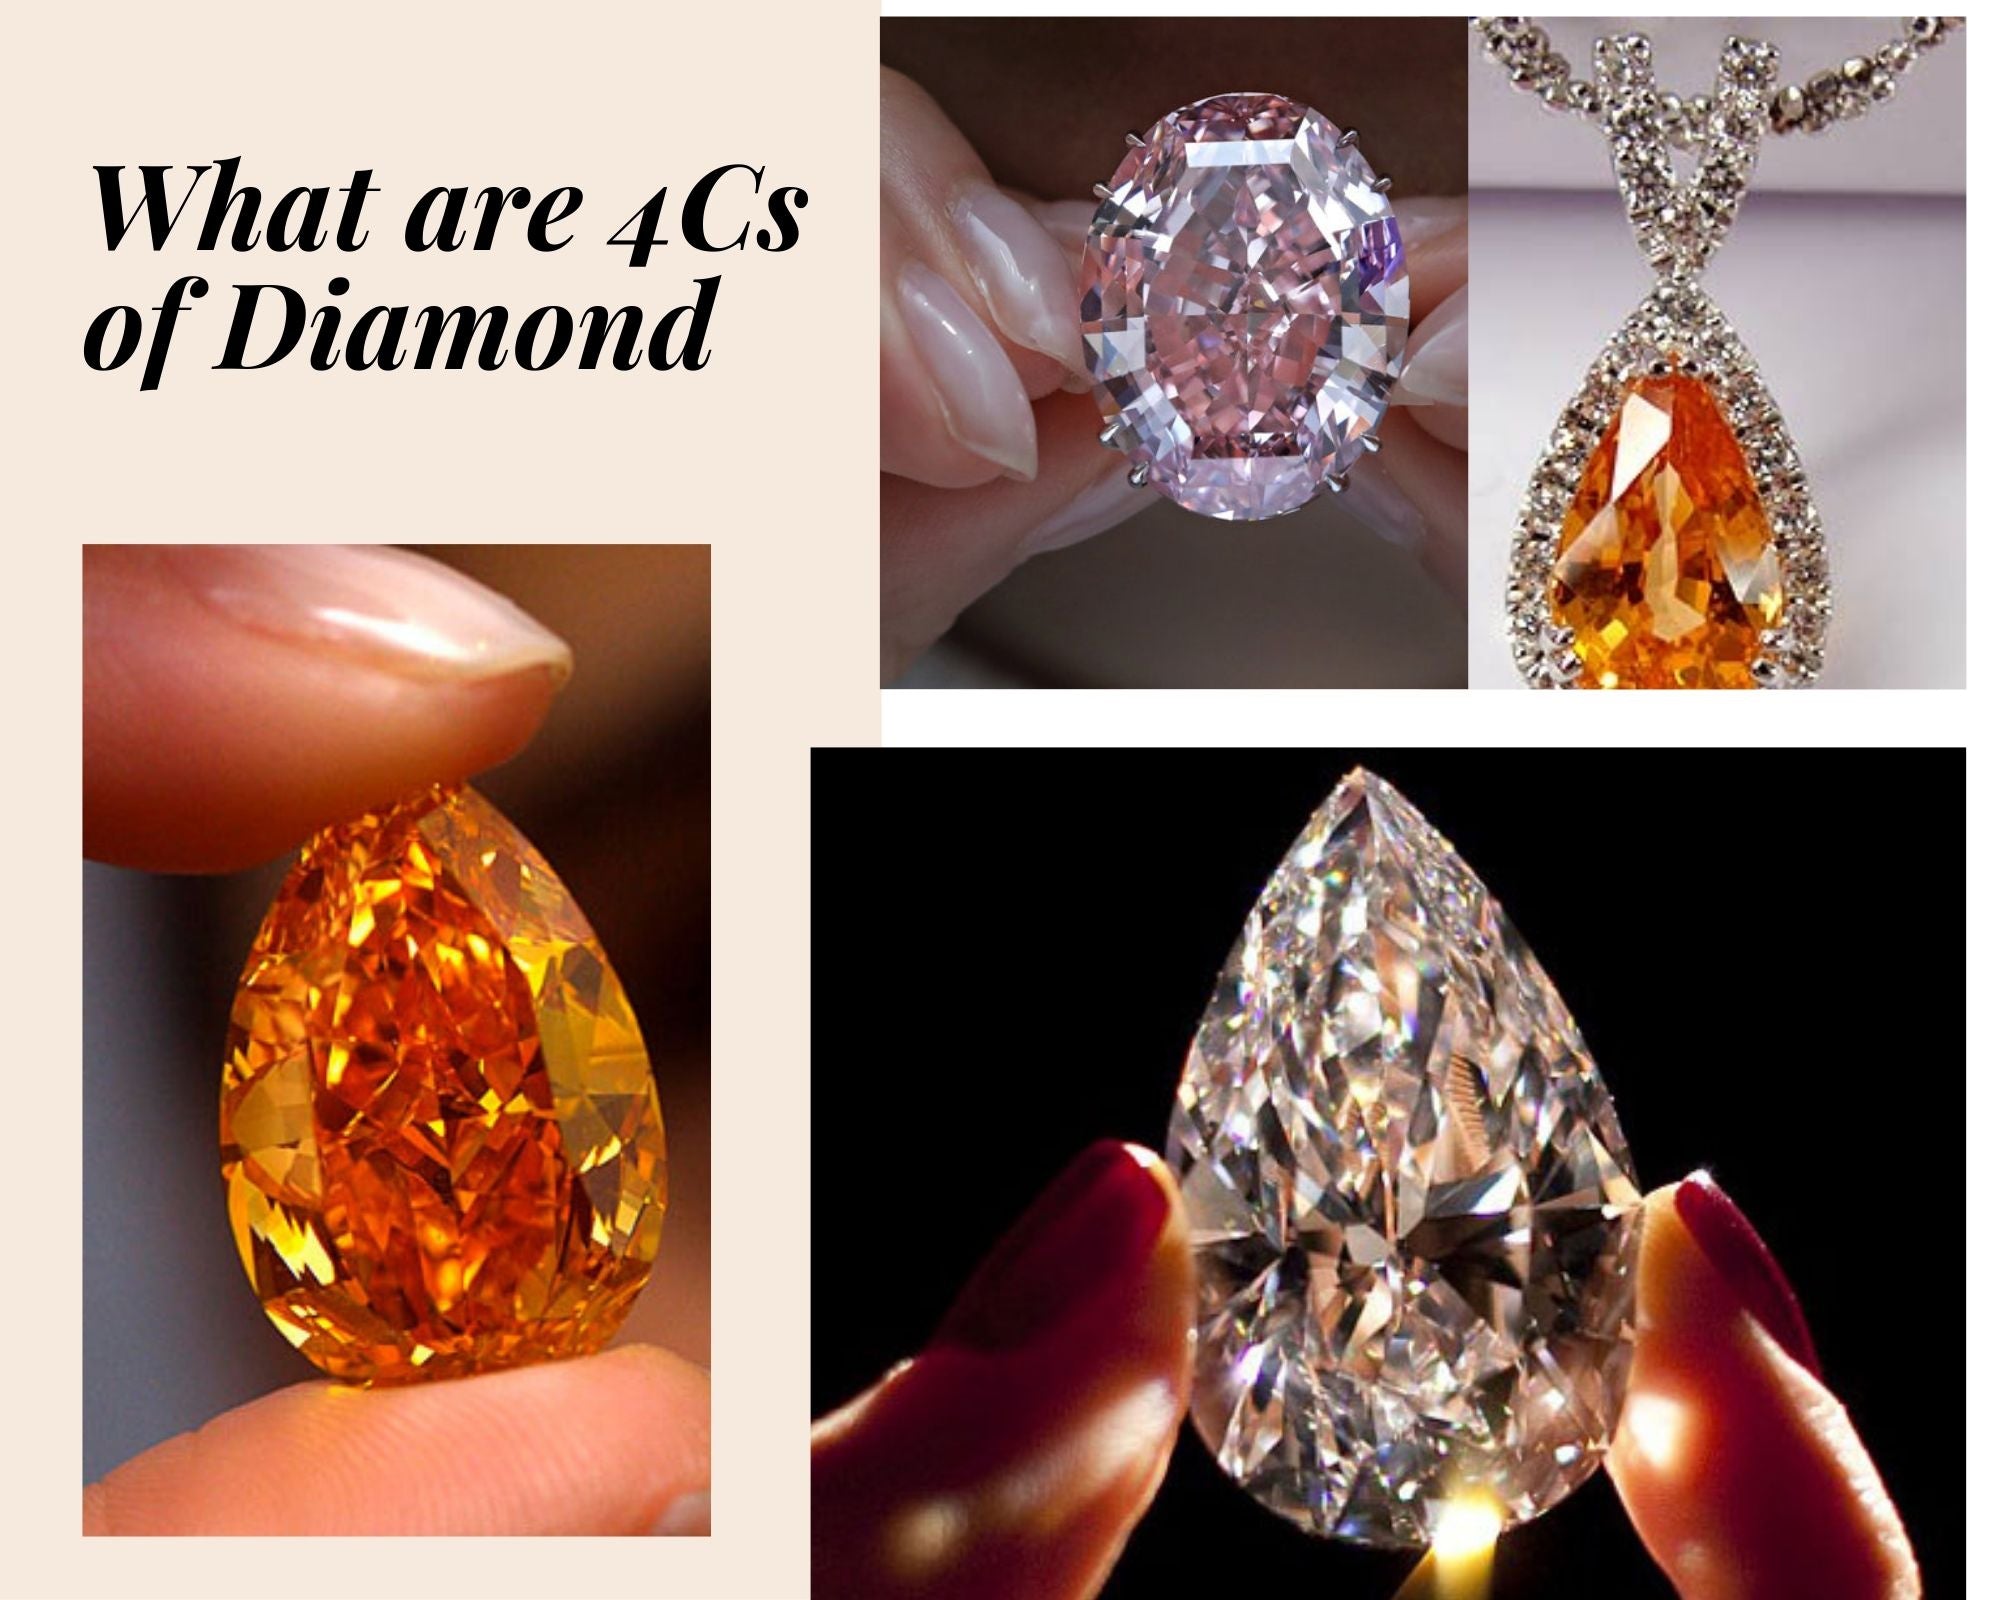 How can we determine Diamonds by Cut, Clarity, Color and Size?